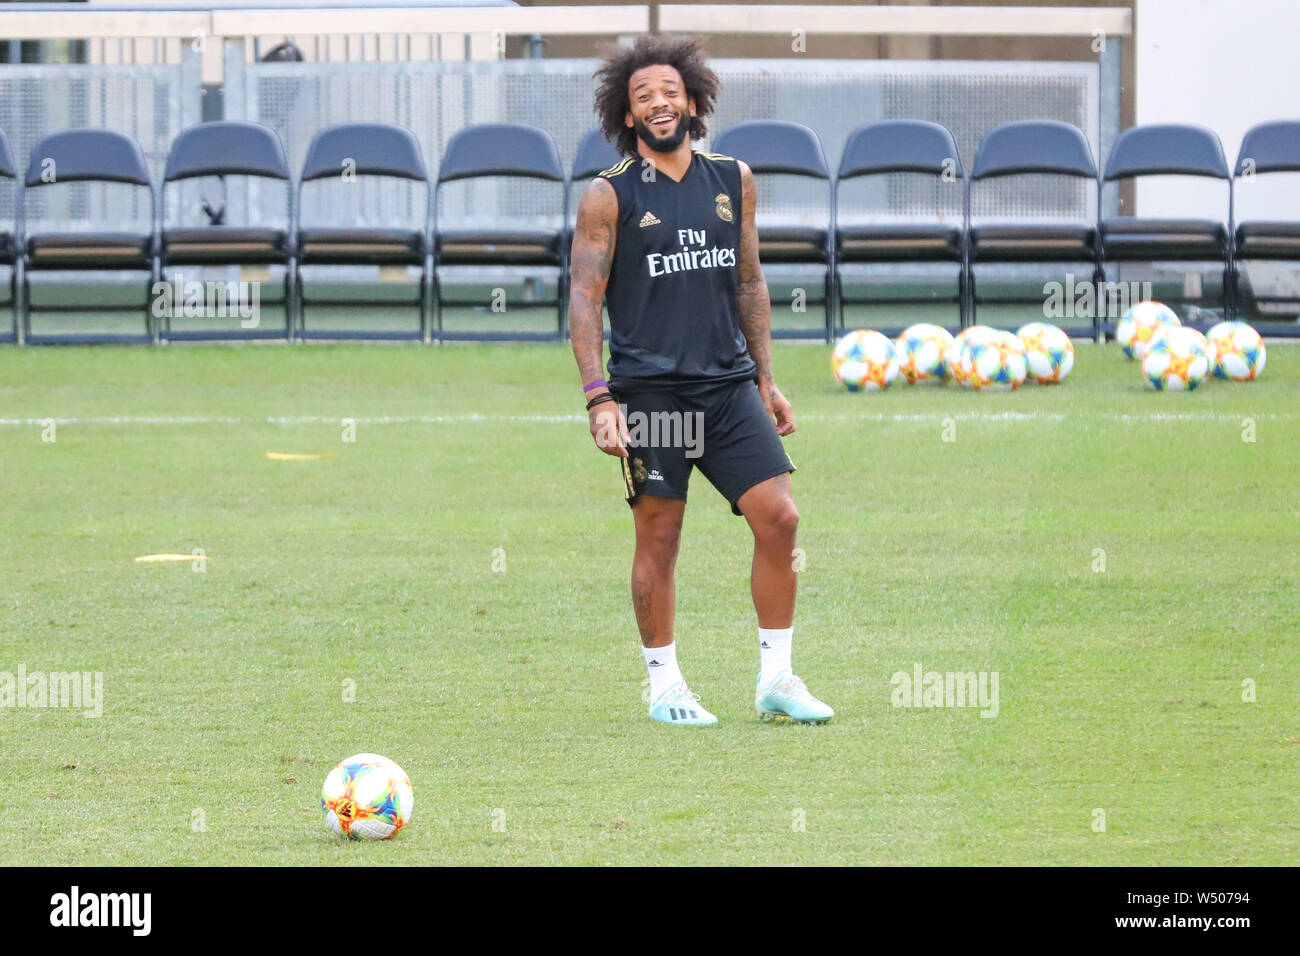 East Rutherford, United States. 25th July, 2019. Marcelo of Real Madrid during training at MetLife Stadium in the city of East Rutherford on Thursday, 25. The team faces Atletico Madrid tomorrow for the International Champions Cup. Credit: Brazil Photo Press/Alamy Live News Stock Photo